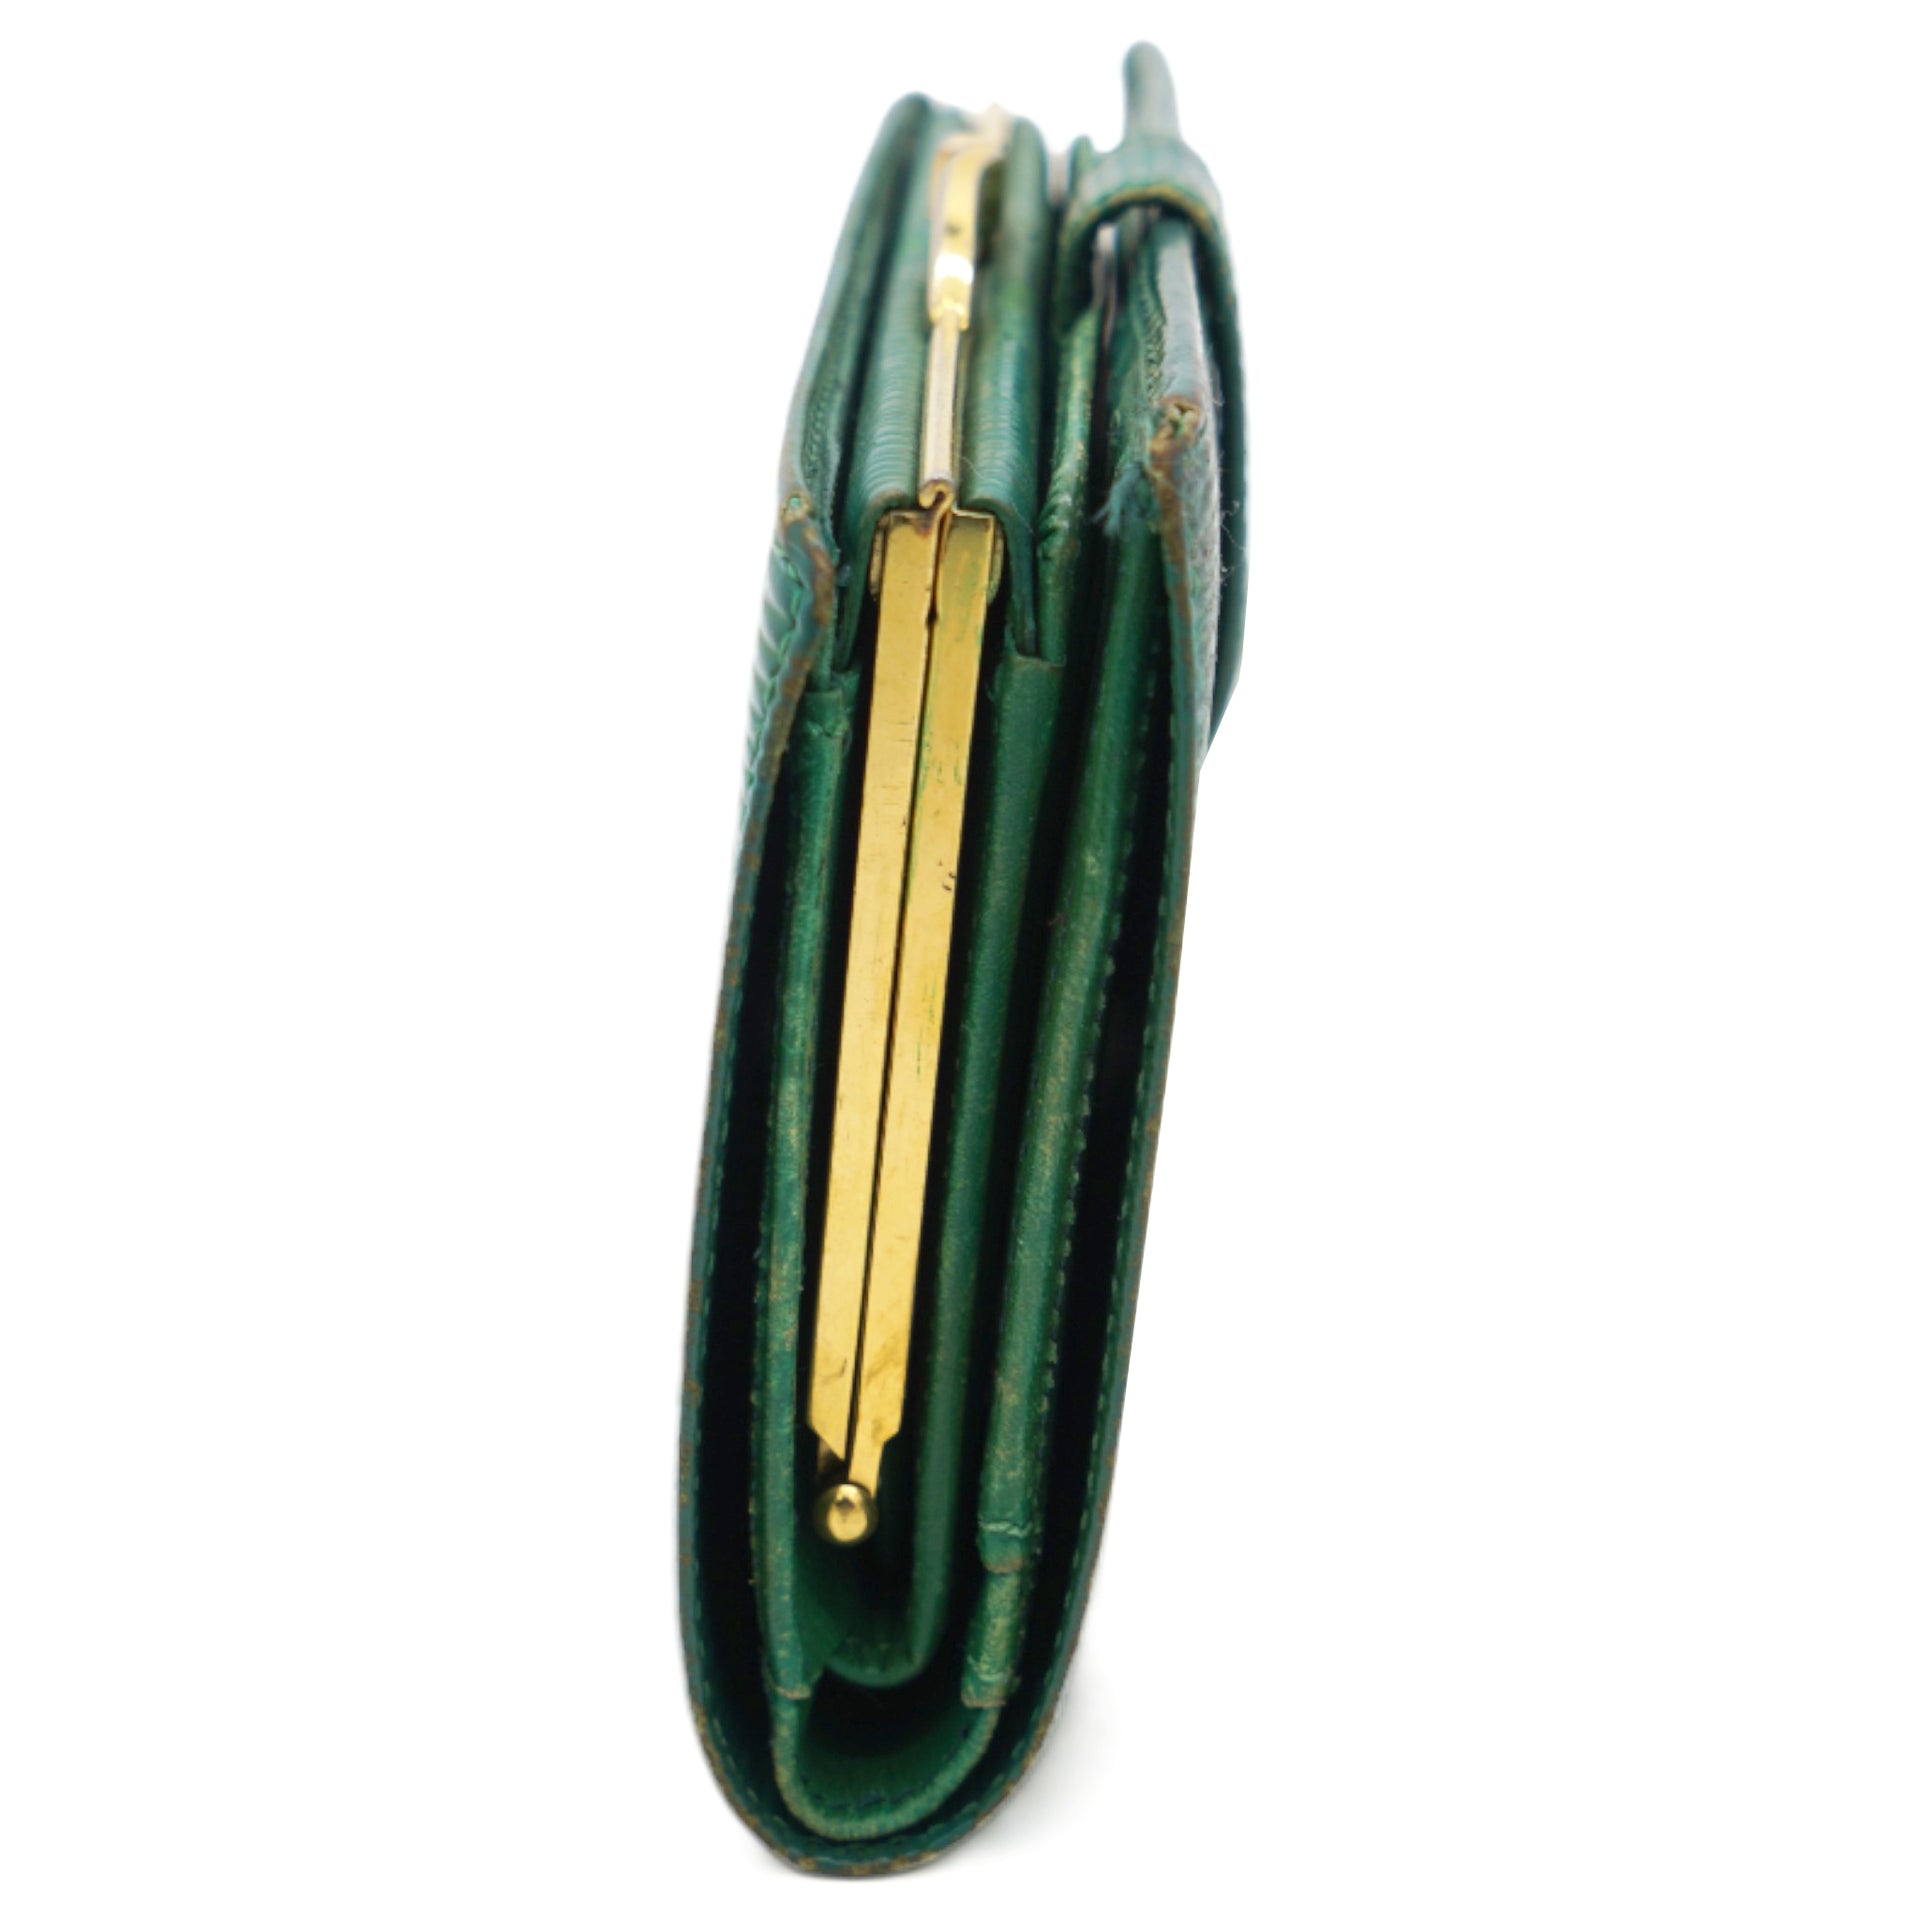 Green Epi Leather Porte Feuille Vienoise NM French Purse Wallet